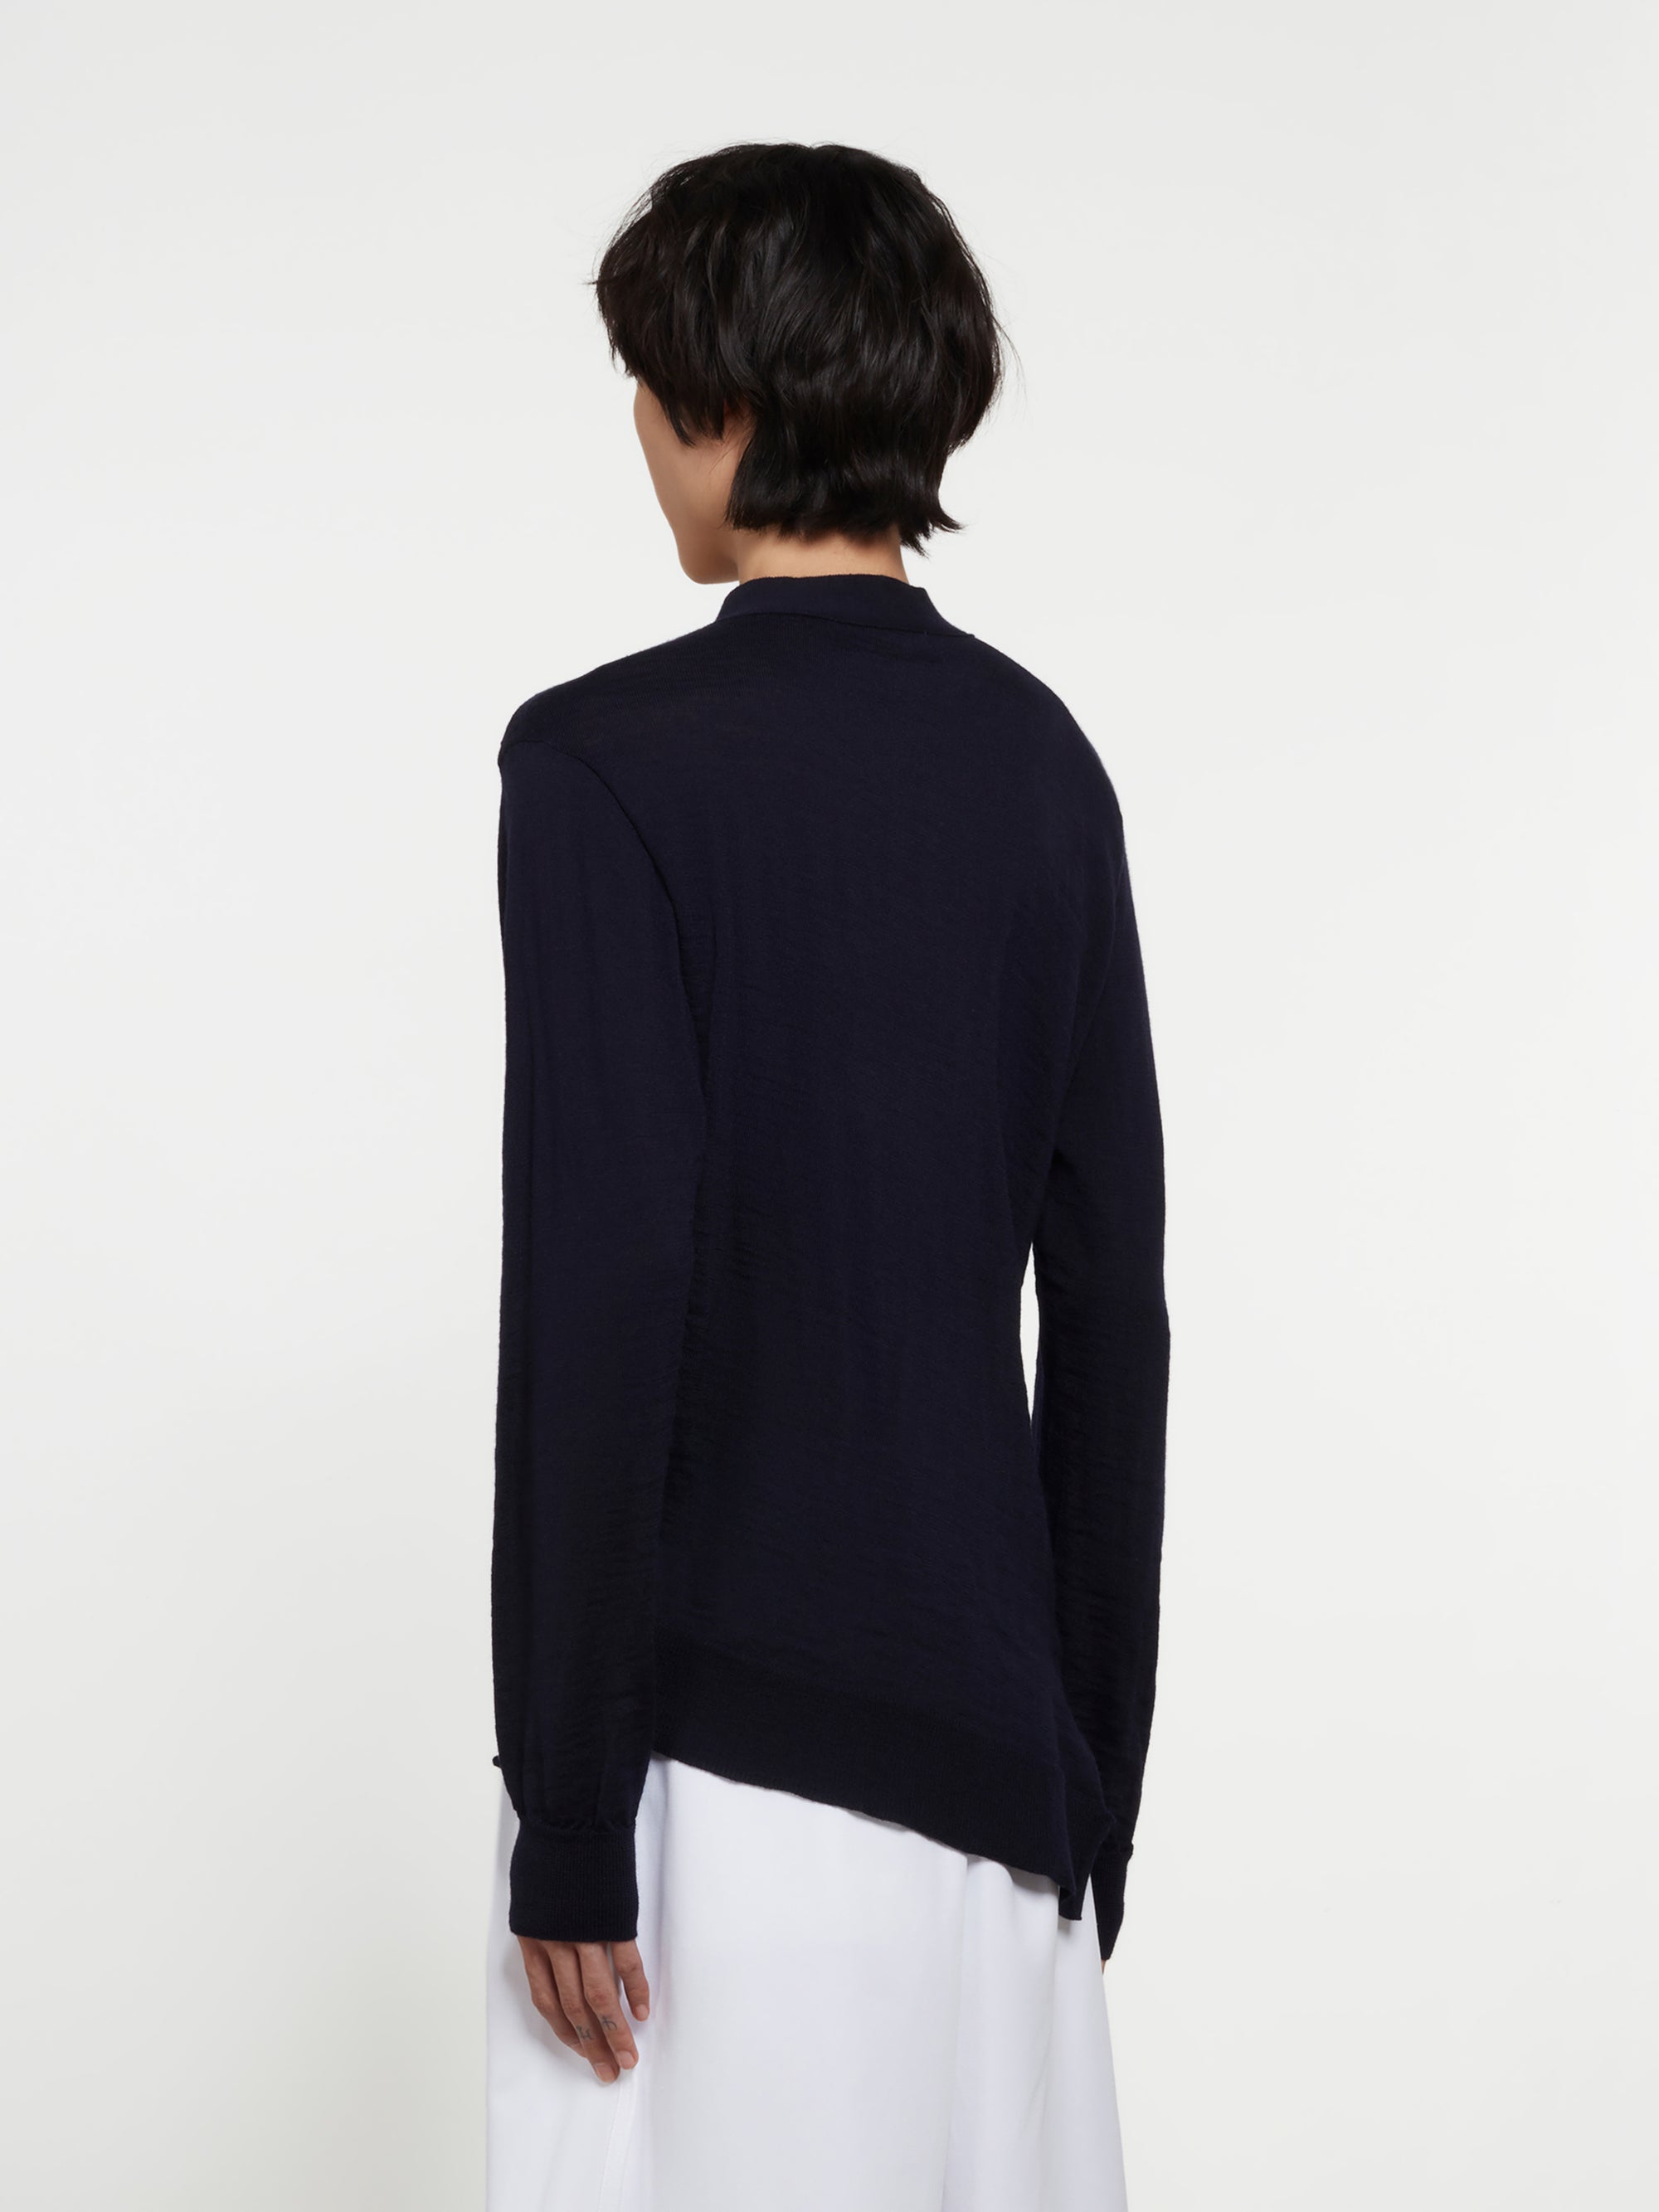 CDG Shirt - Lacoste Knit Cardigan - (Navy) view 3